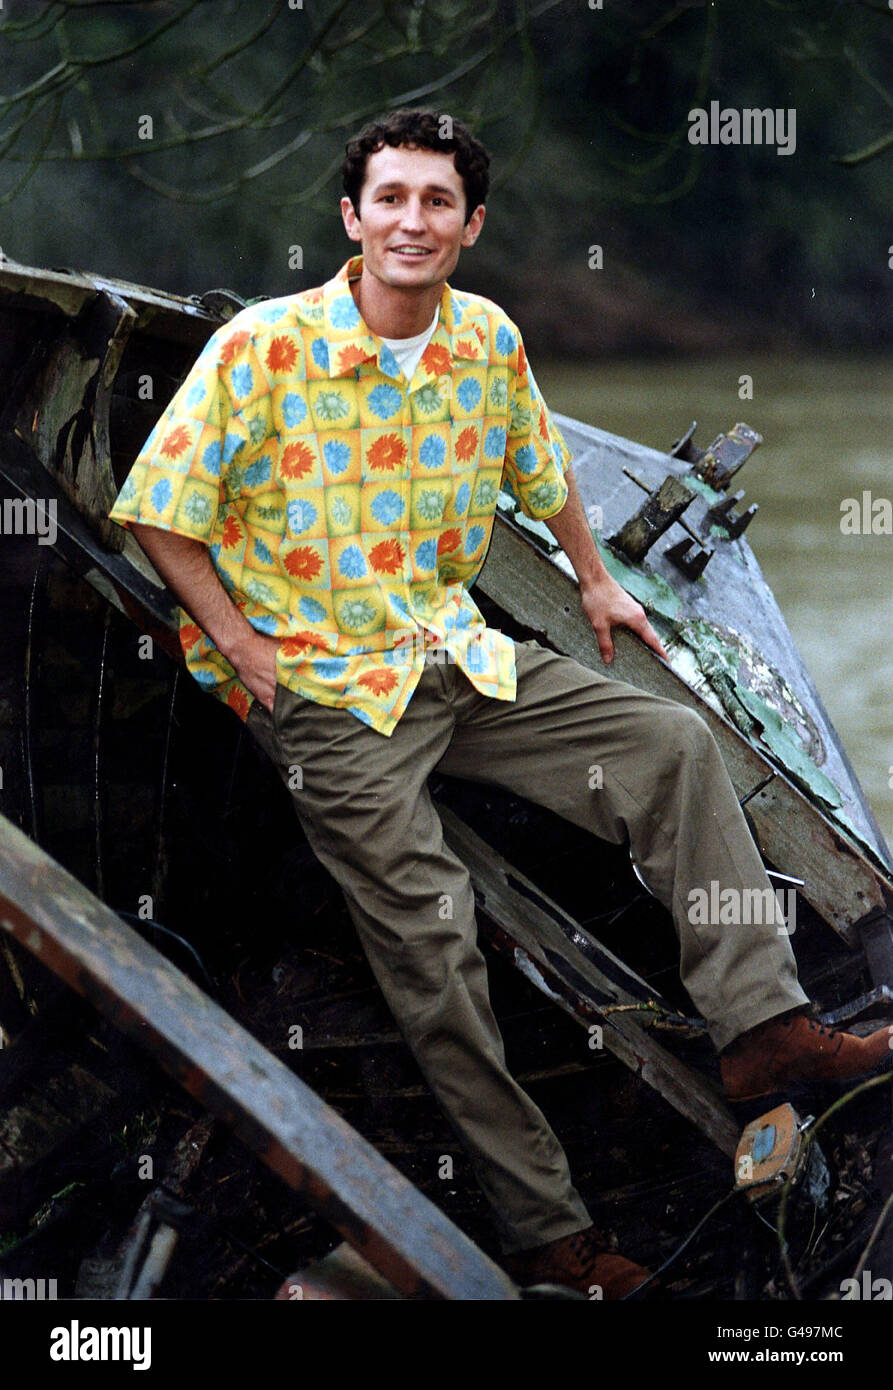 Australian soap star Adam Willits (Steve) from 'Home and Away' takes a break during filming near Ironbridge in Shropshire, today (Monday). Adam Willits (Steve). Picture DAVID JONES/PA Stock Photo